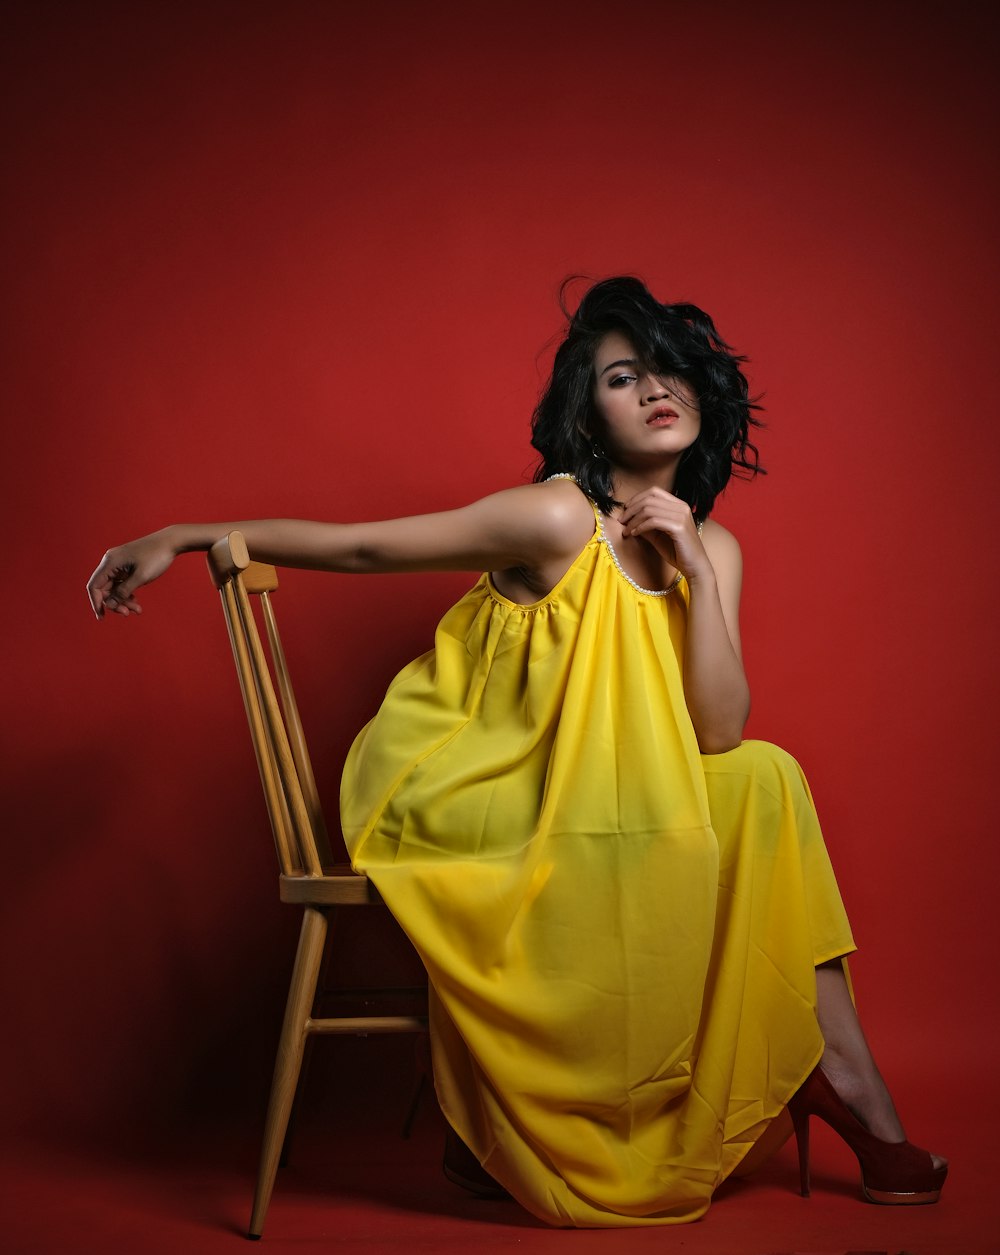 a woman in a yellow dress sitting on a chair